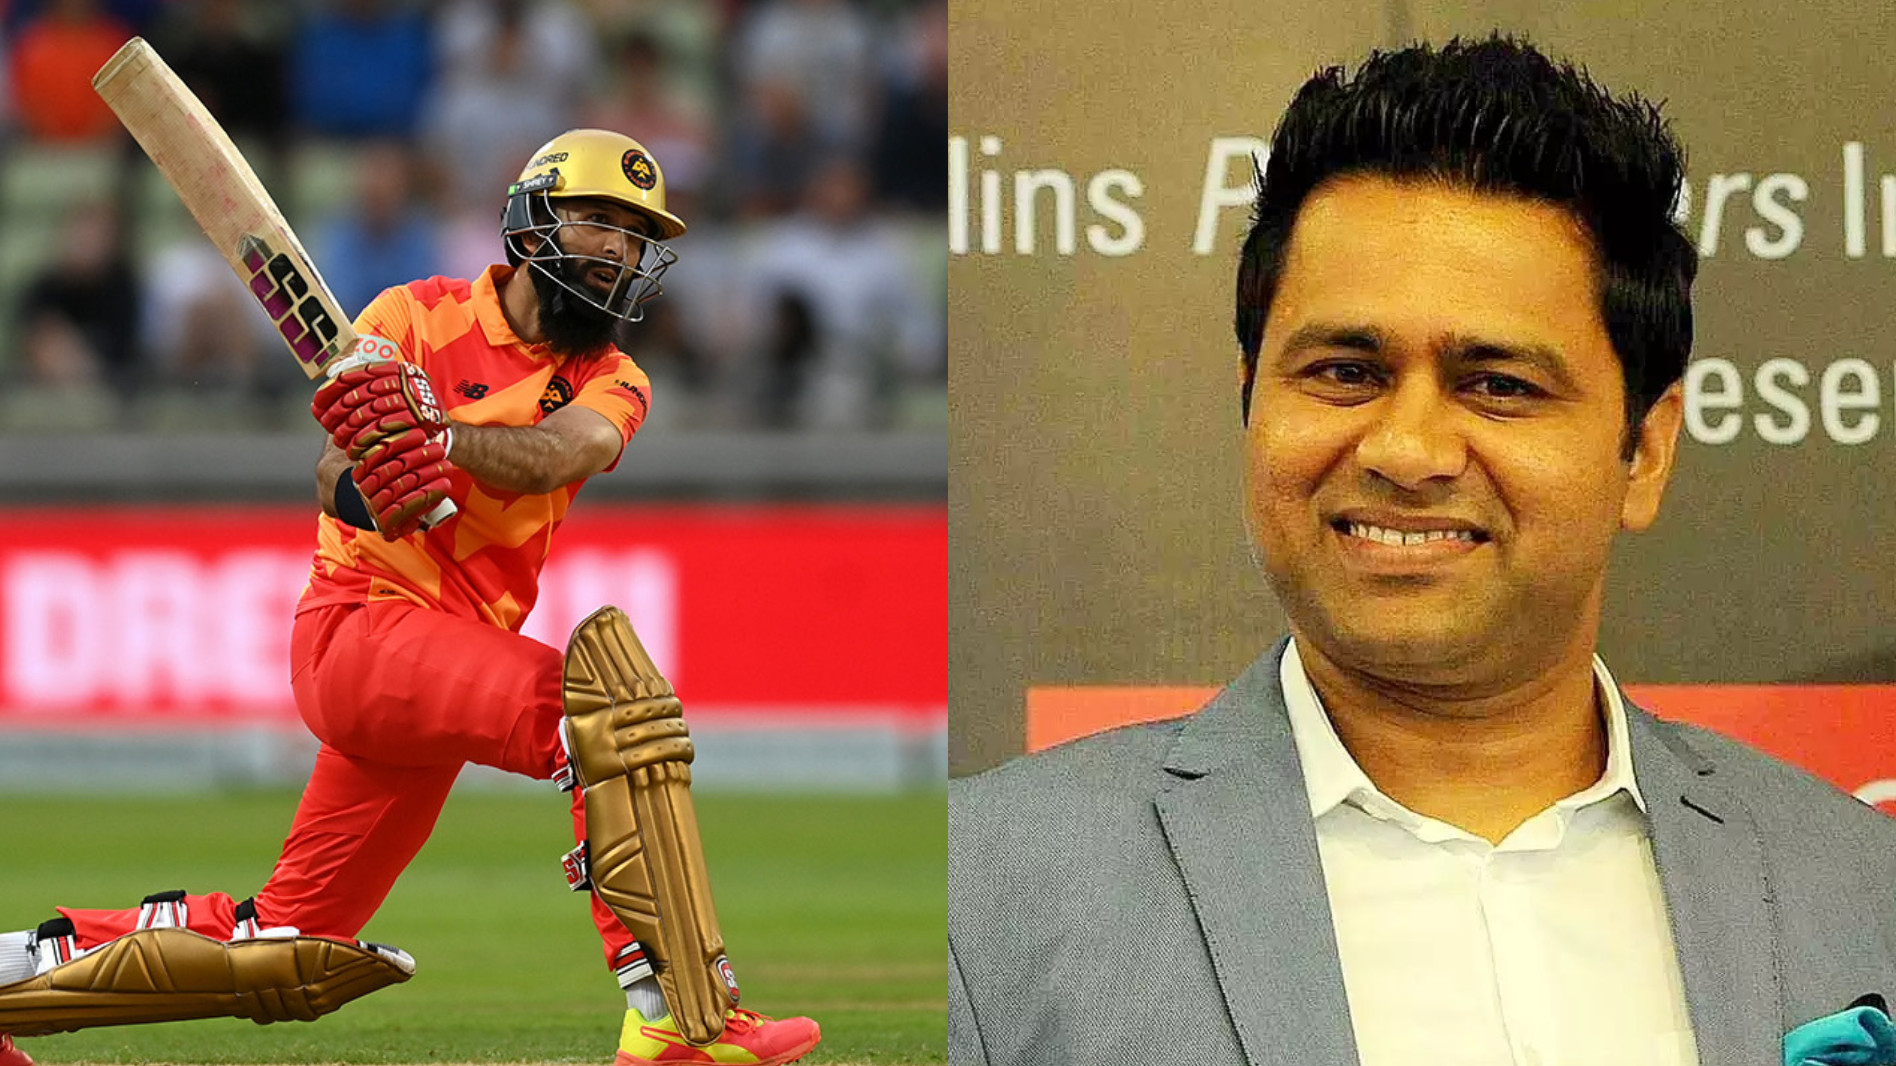 Aakash Chopra slams ECB for releasing players for The Hundred in between Tests, says imagine BCCI doing same for IPL